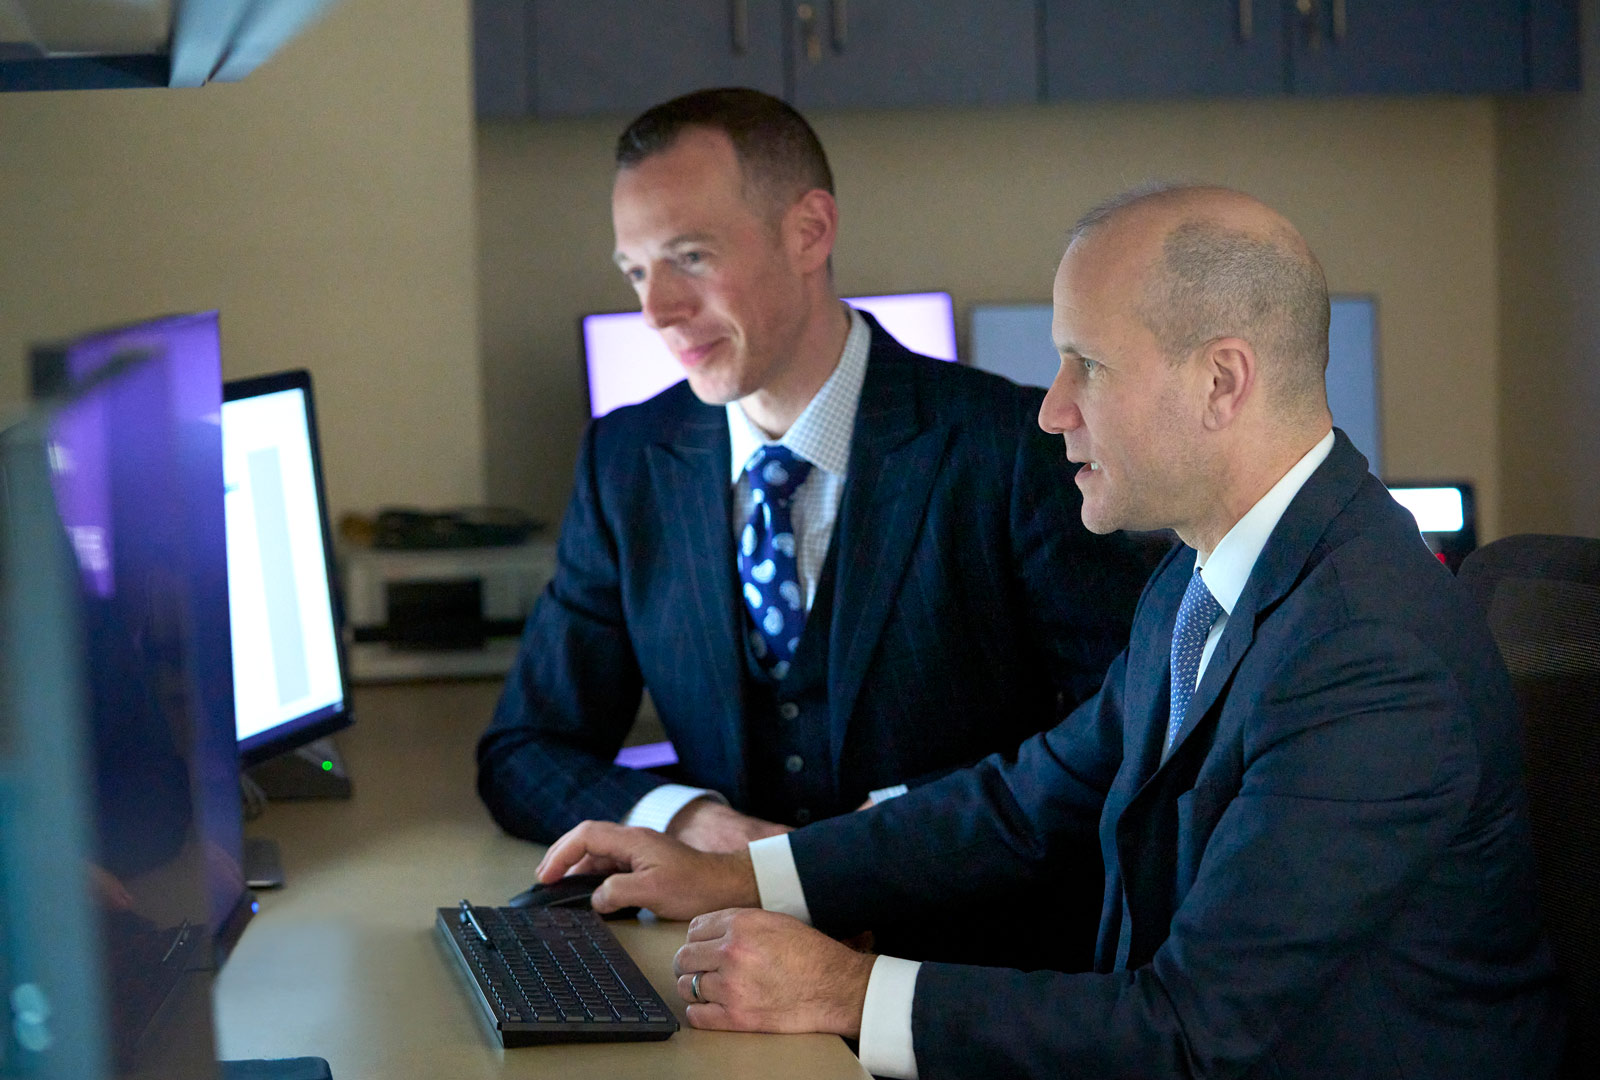 Two Radiation Oncologists review imaging results on computer.